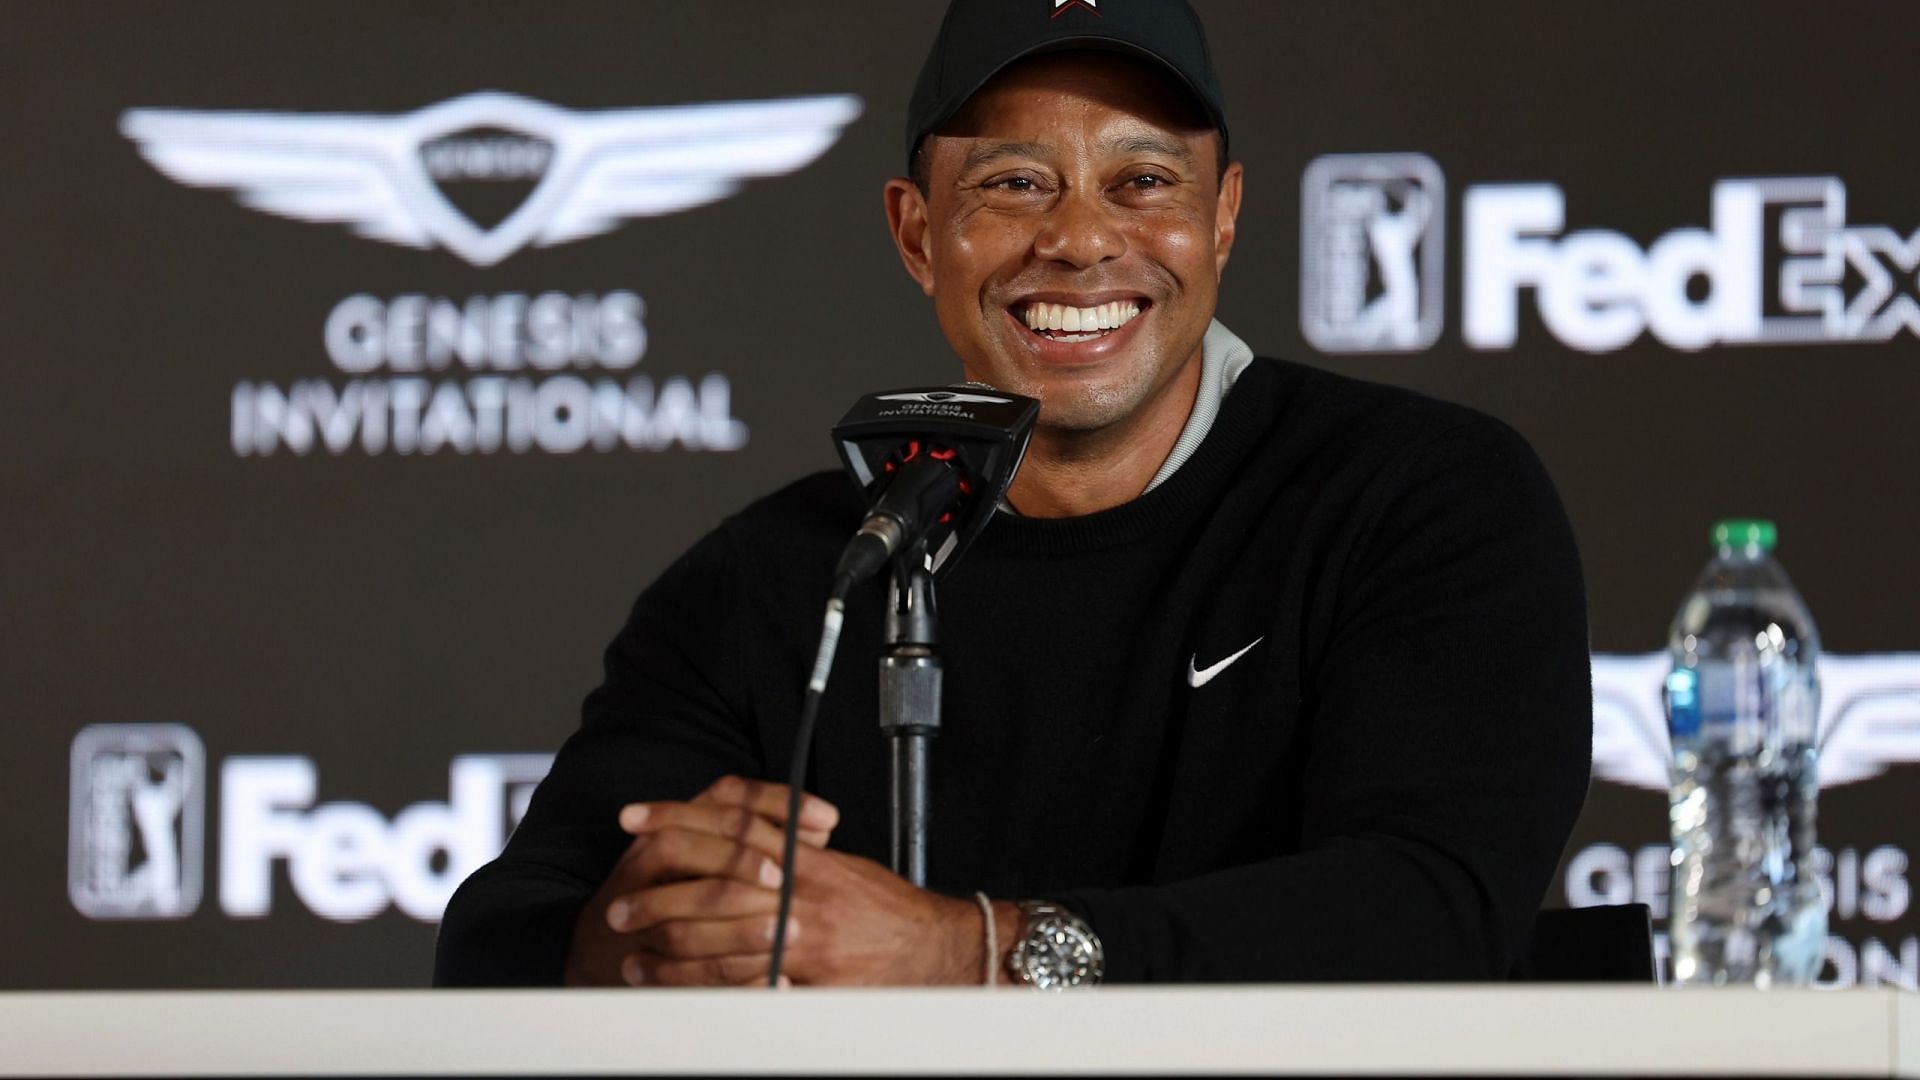 Tiger Woods has announced he will play in the Genesis Invitational next week